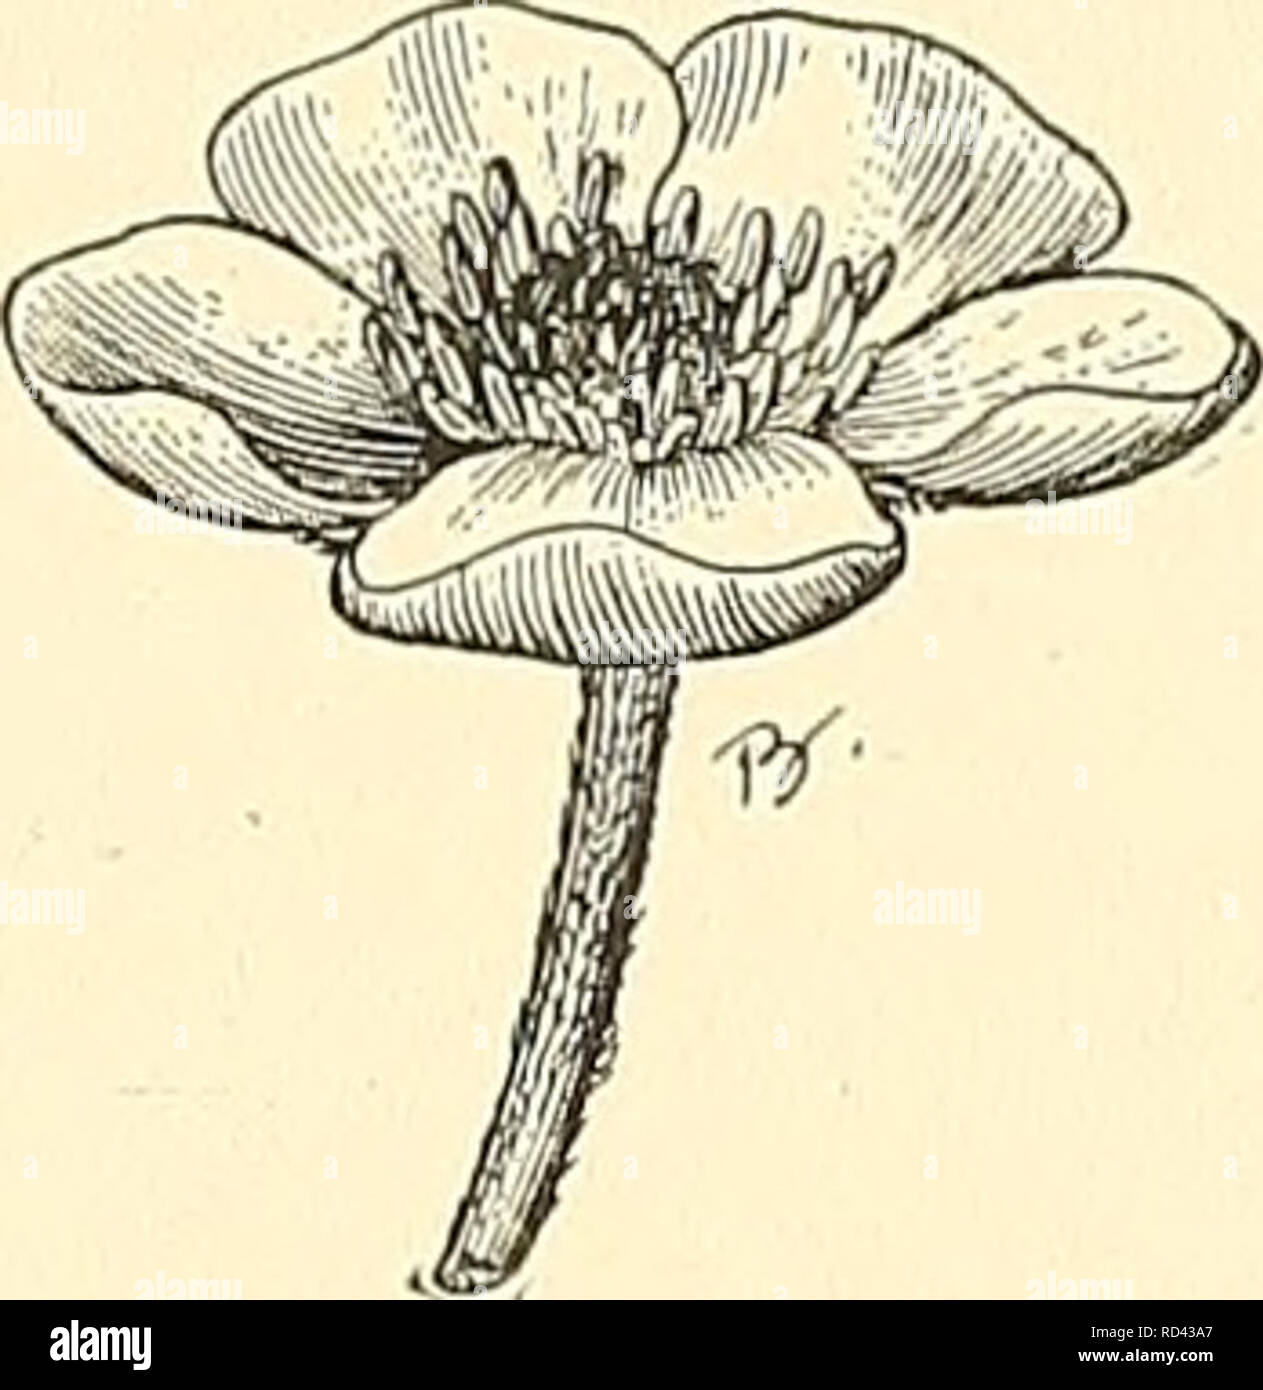 . Cyclopedia of American horticulture, comprising suggestions for cultivation of horticultural plants, descriptions of the species of fruits, vegetables, flowers, and ornamental plants sold in the United States and Canada, together with geographical and biographical sketches. Gardening. RAMPION RANUNCULUS U97 RAMFION, HORNED. Pliijteitma. RAM'S HEAD. Cijpripecliiim arielhium. RAMSTED. Linaria vultjaris. RANDIA (Isaac Rand, author of an index of plants cult, at Botanical Gardens of the Society of Apothe- caries at Chelsea, published 1730 and 1739). Jiiibidcein. A genus of about 100 species of t Stock Photo